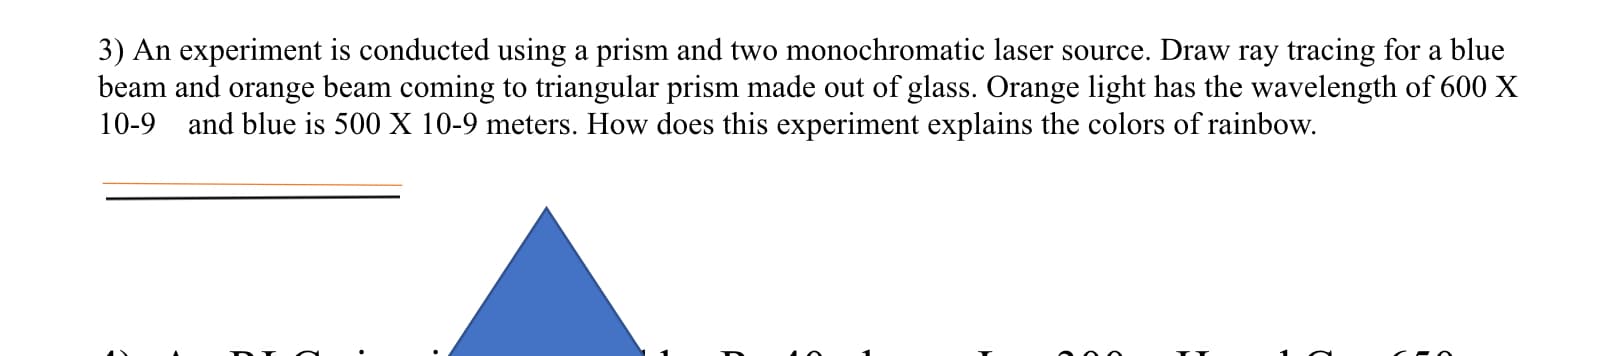 3) An experiment is conducted using a prism and two monochromatic laser source. Draw ray tracing for a blue
beam and orange beam coming to triangular prism made out of glass. Orange light has the wavelength of 600 X
10-9 and blue is 500 X 10-9 meters. How does this experiment explains the colors of rainbow.
